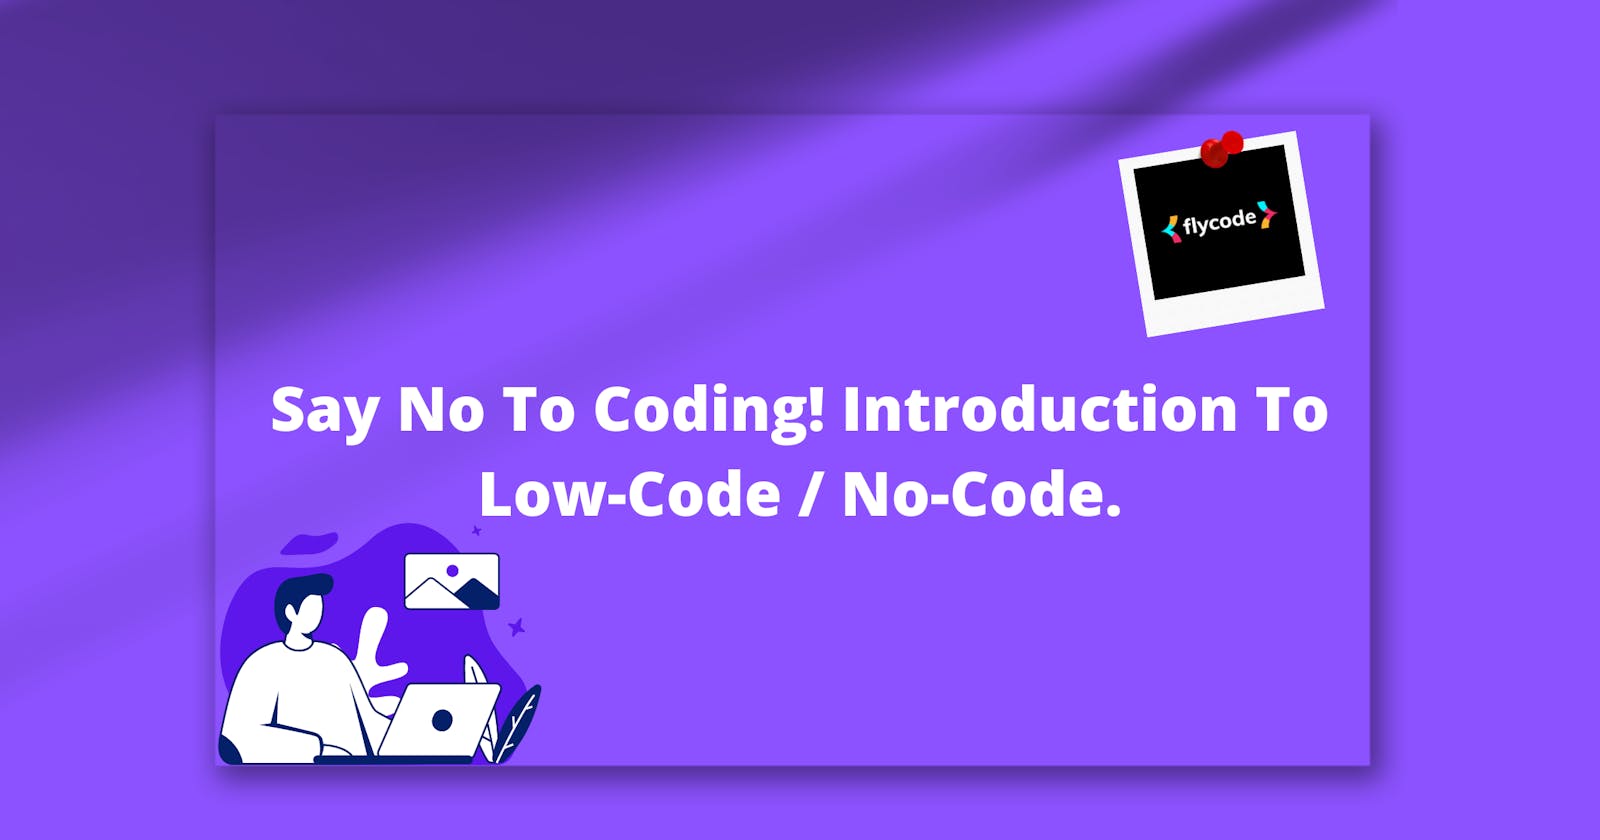 Say No to Coding! Introduction to Low-Code / No-Code